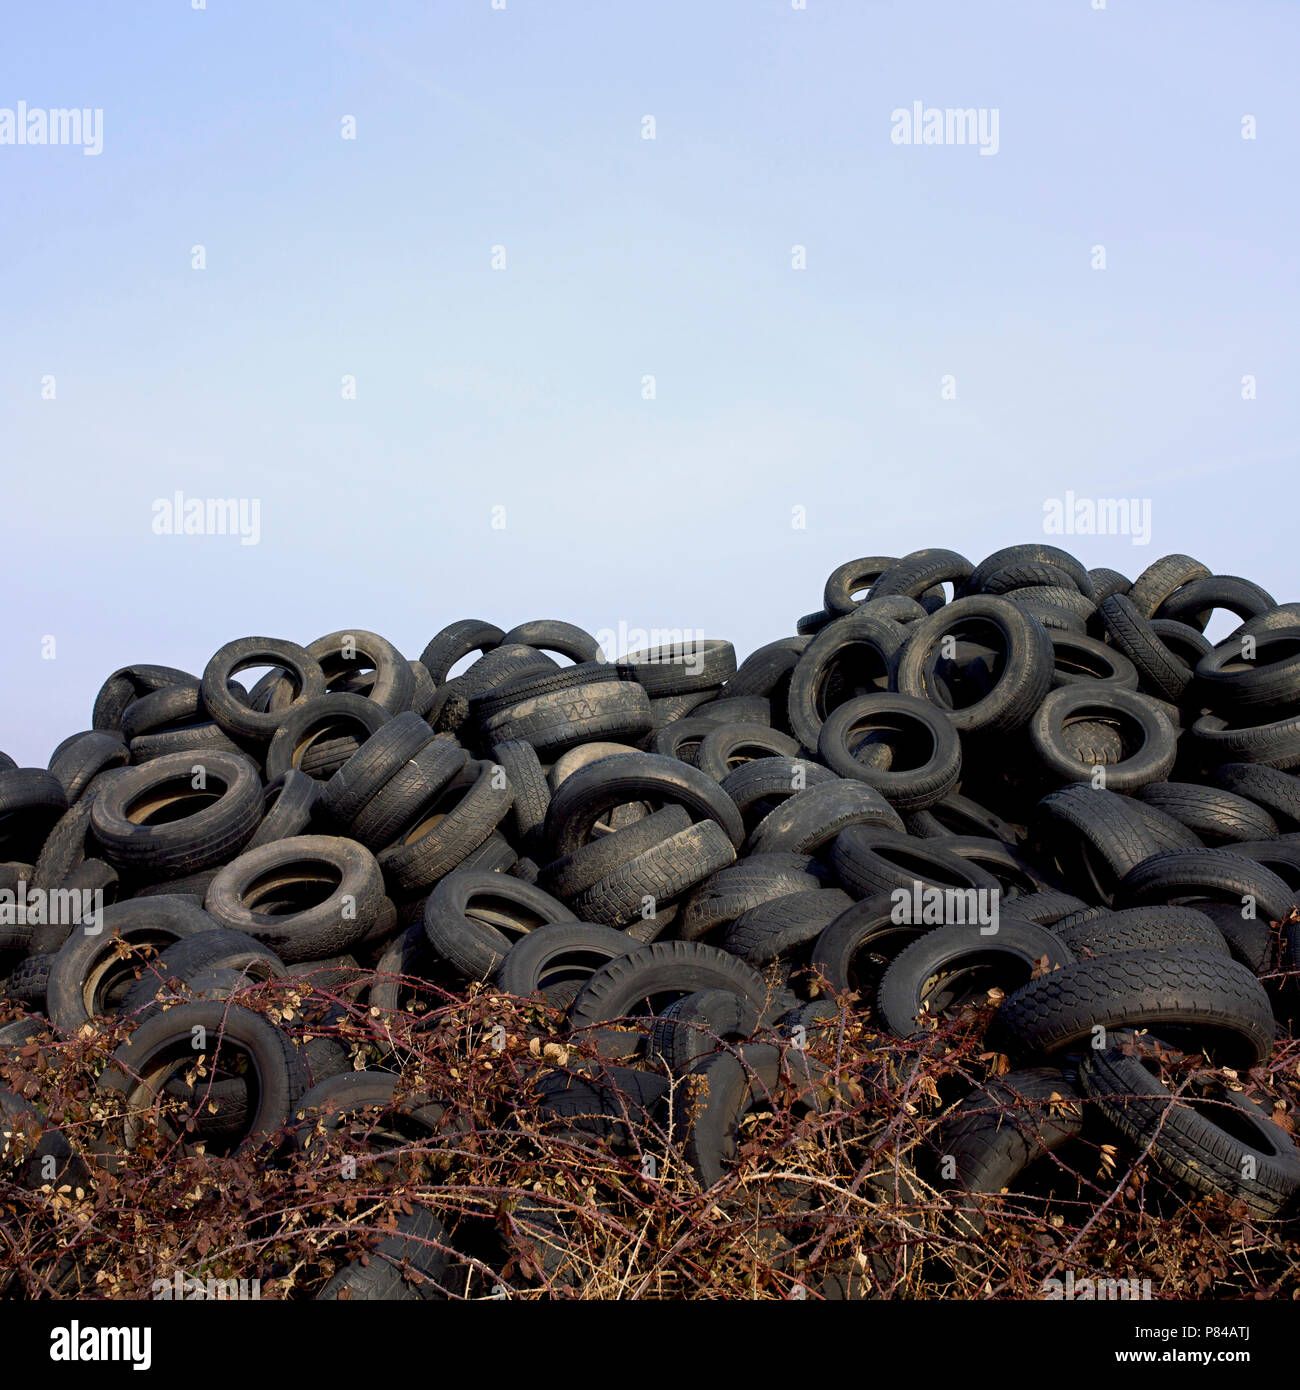 Pile of tyres, Auvergne, France Stock Photo